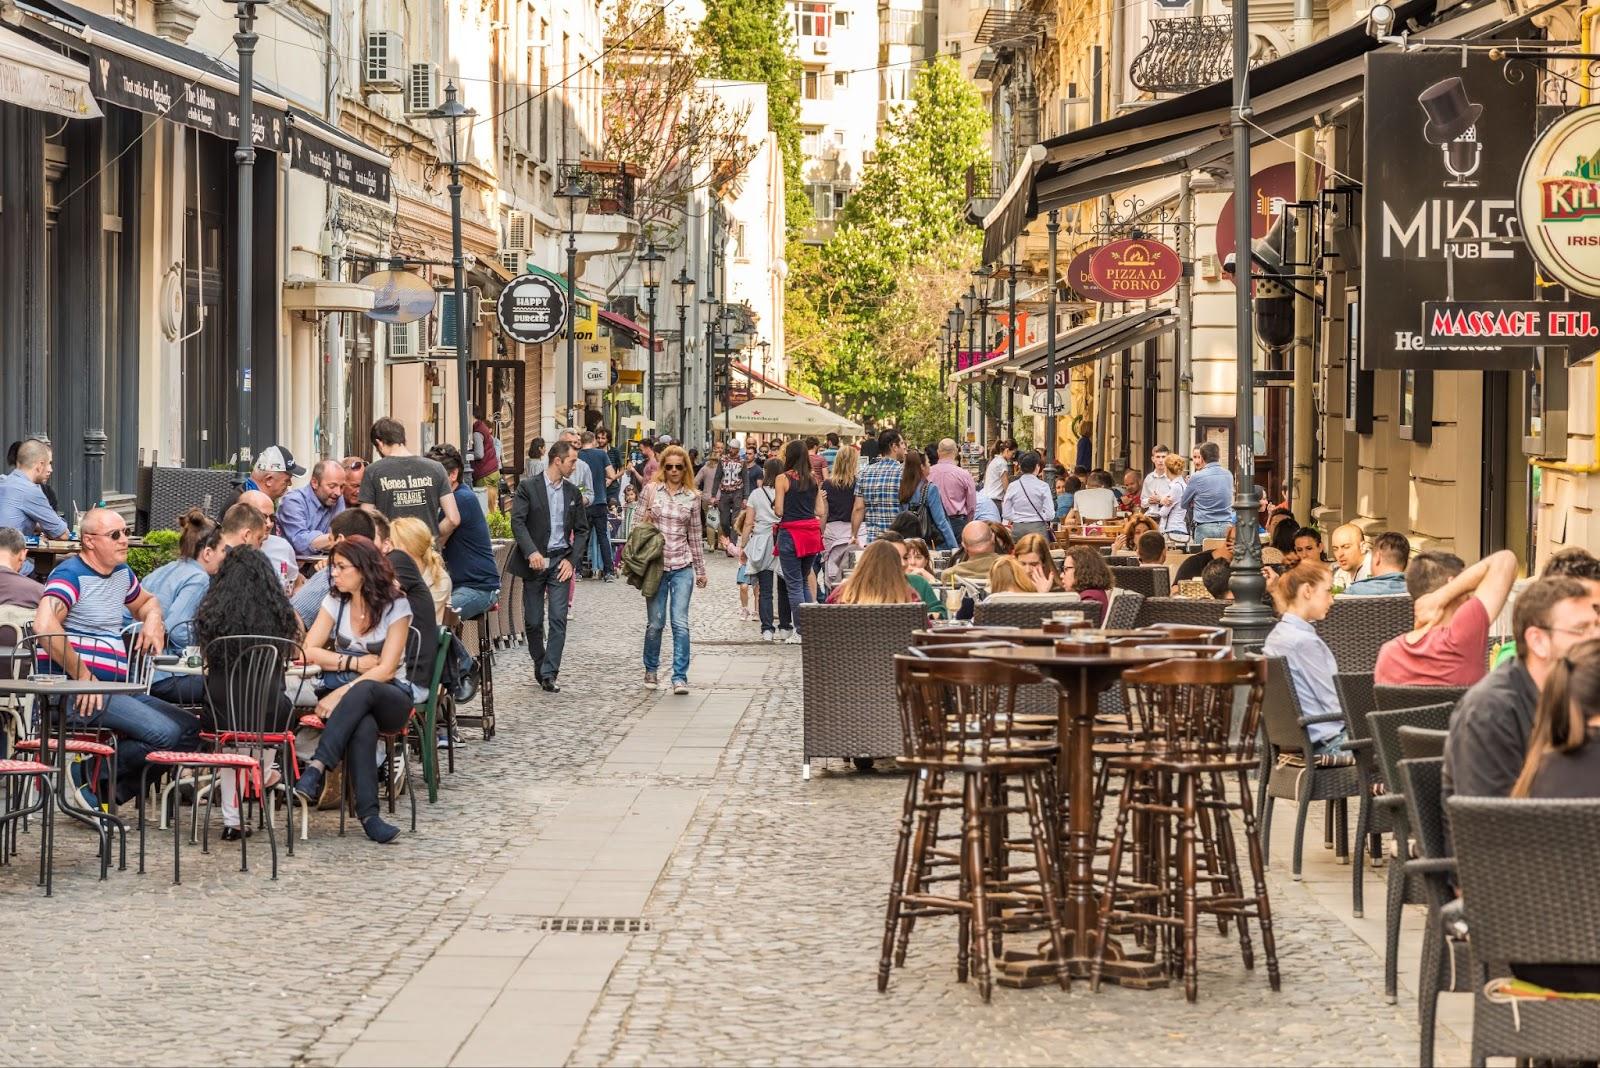 Tourists Visiting And Having Lunch At Outdoor Restaurant Cafe Downtown Lipscani Street, one of the most busiest streets of central Bucharest.